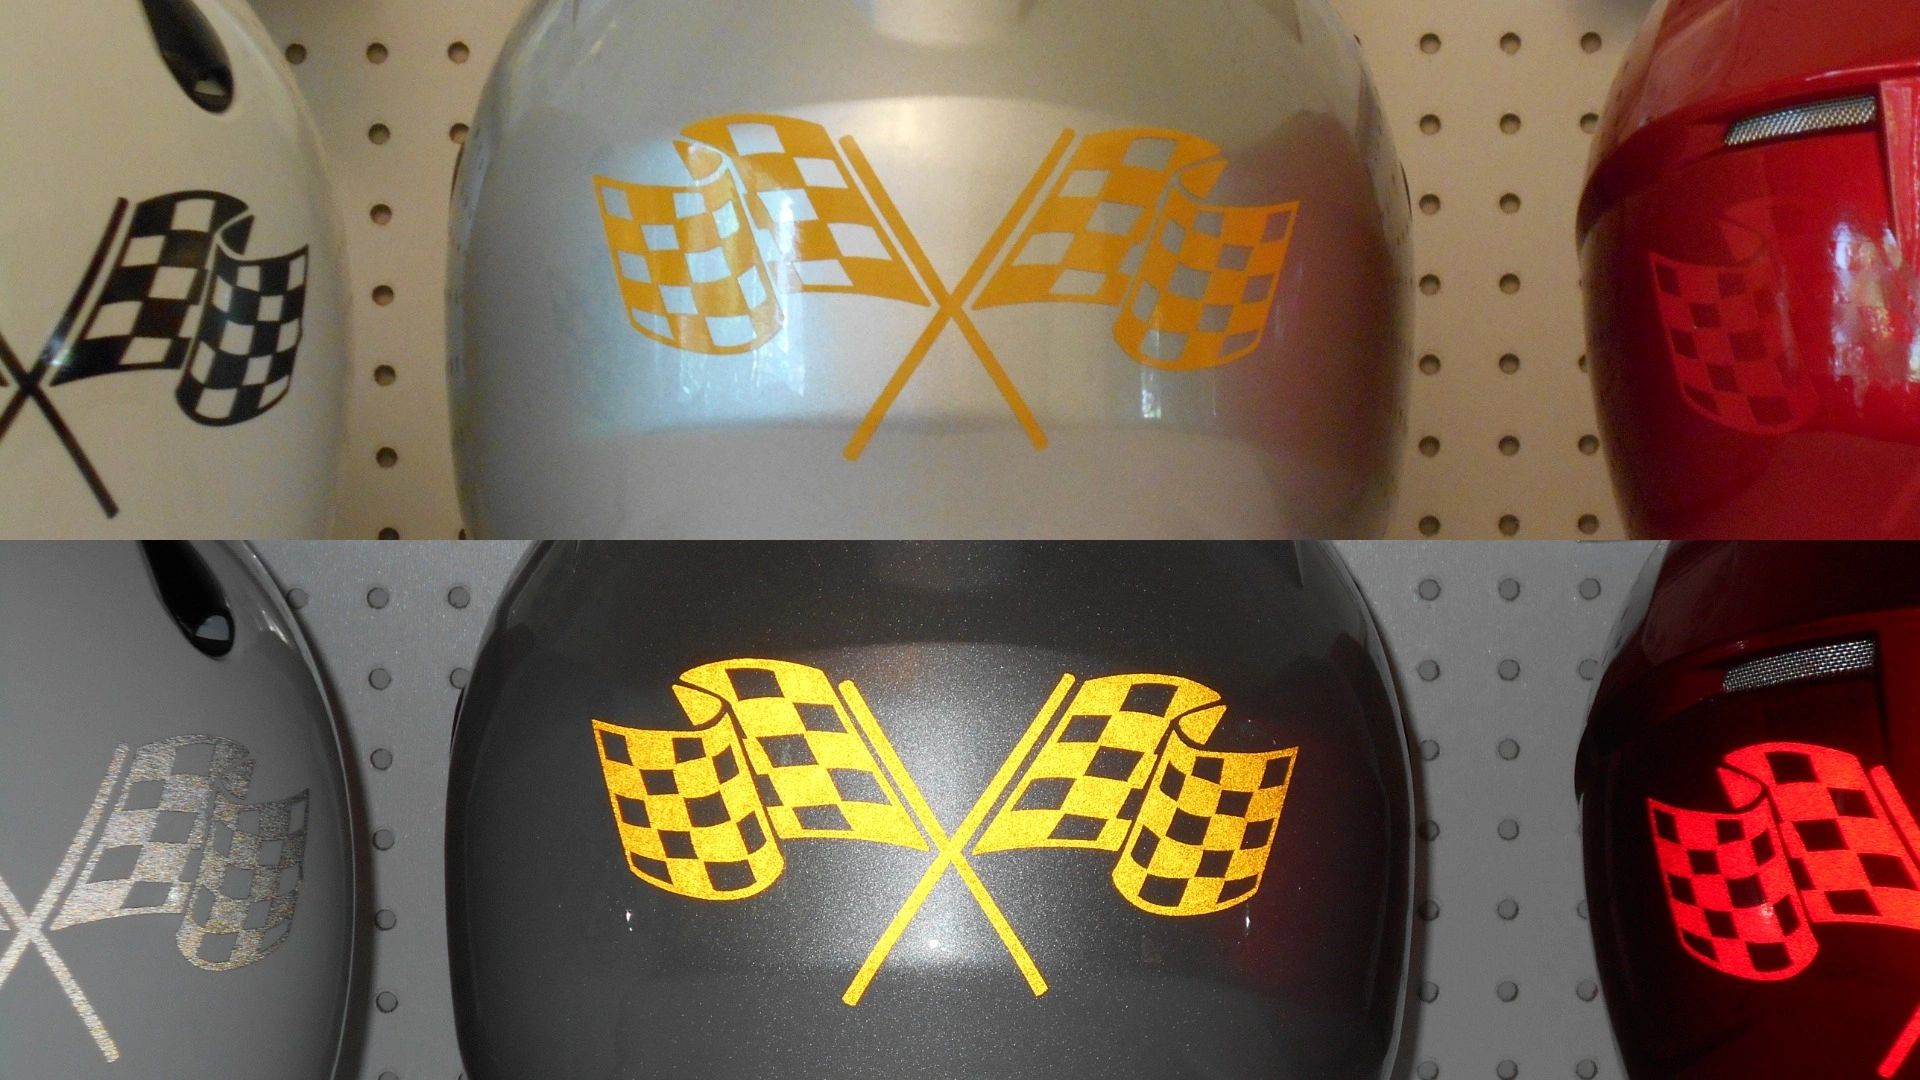 Reflective flag decals on a silver helmet